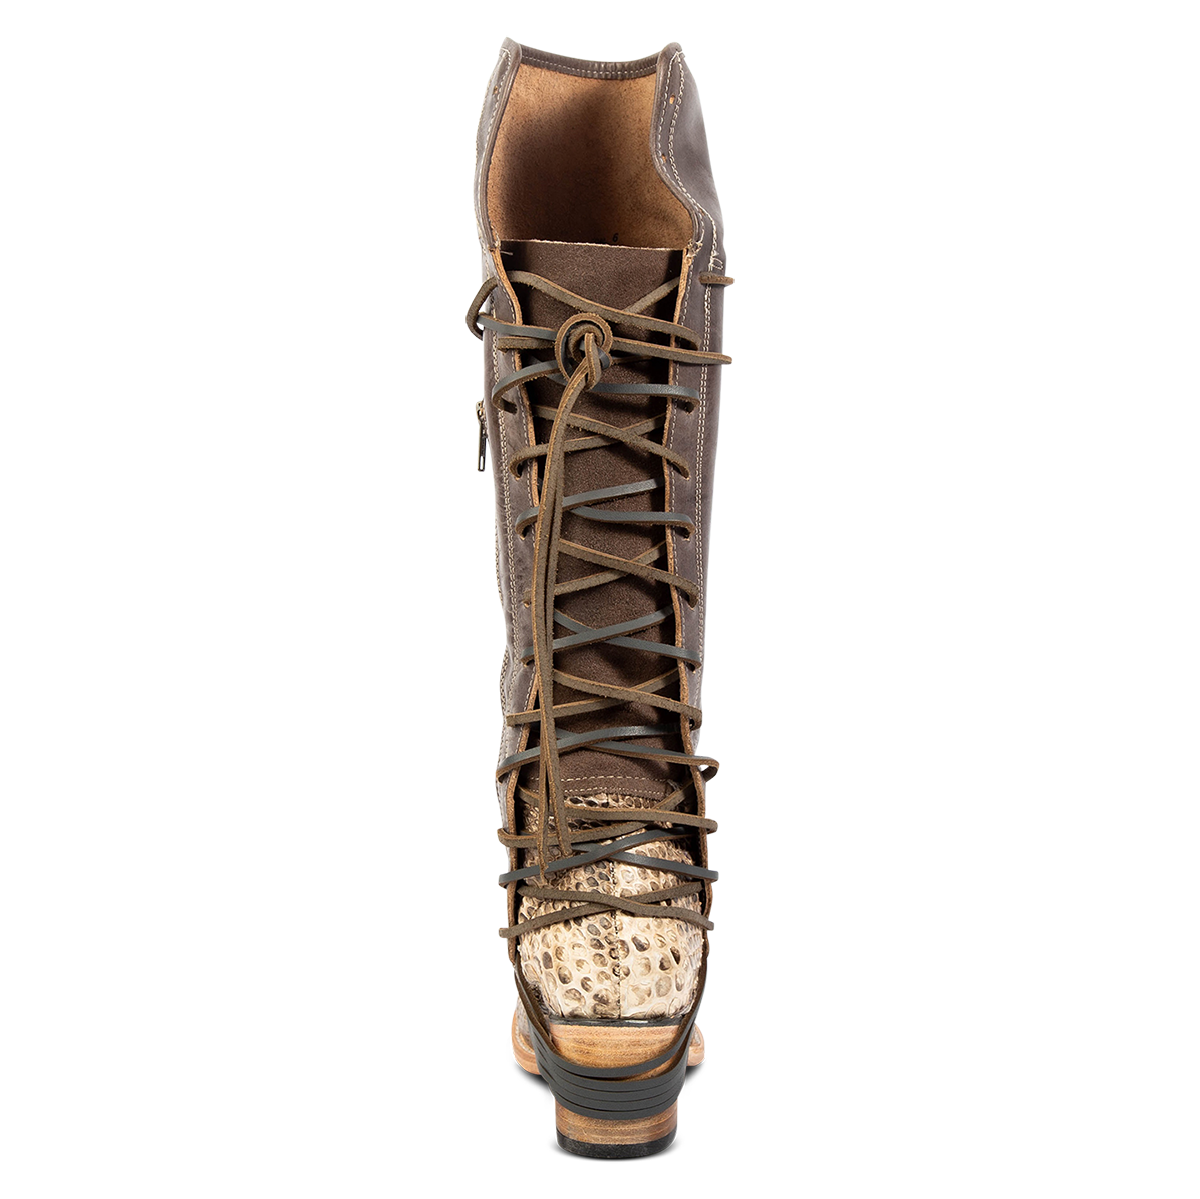 Back view showing expandable panel with adjustable leather lacing on FREEBIRD women's Coal black/beige python leather tall boot 